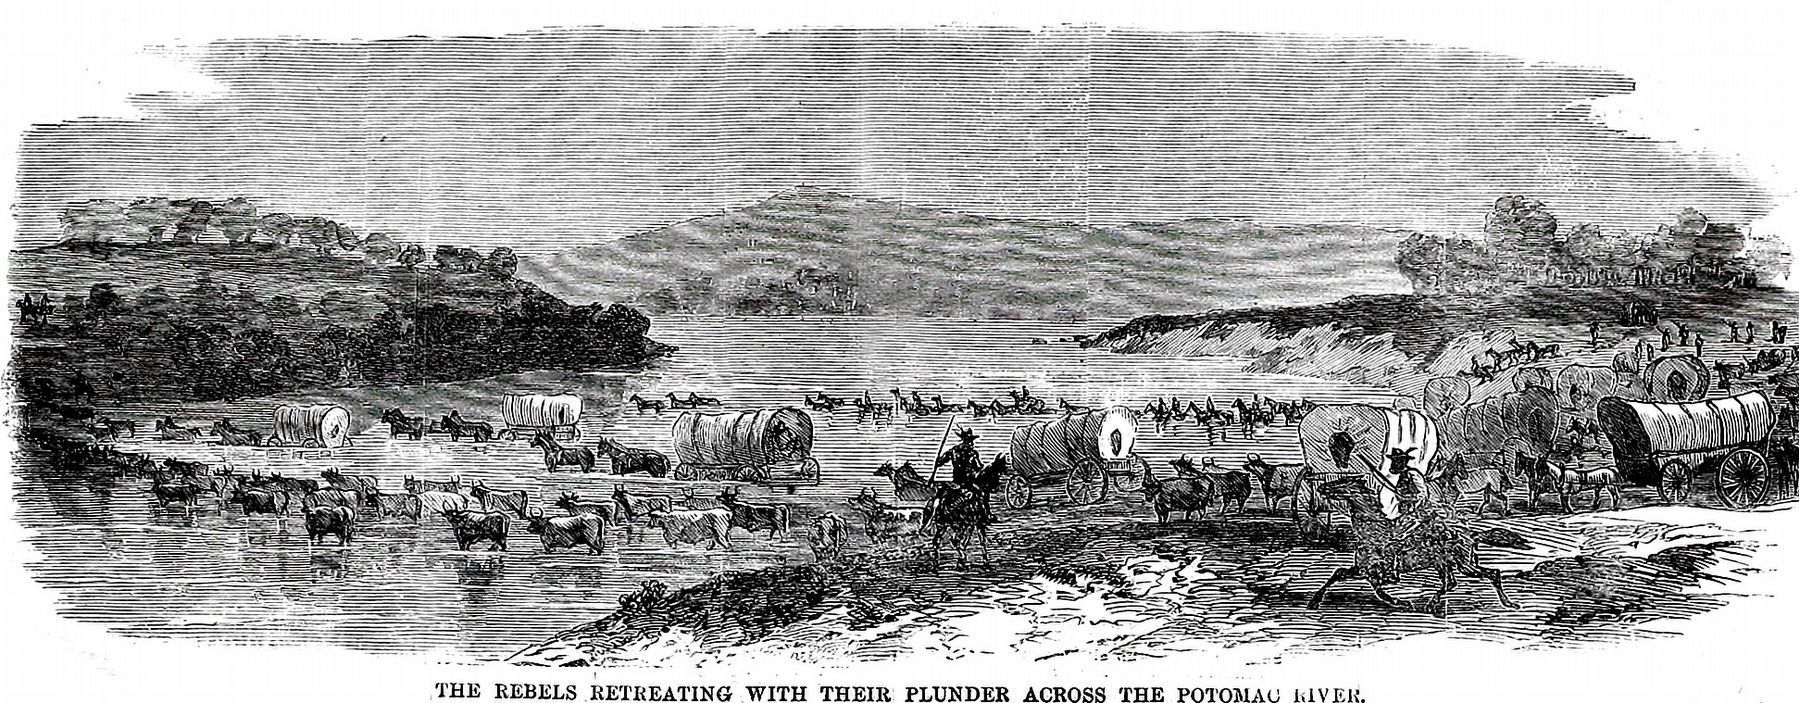 Rebels Retreating with Their Plunder<br>Across the Potomac River,<br>1864 image. Click for full size.